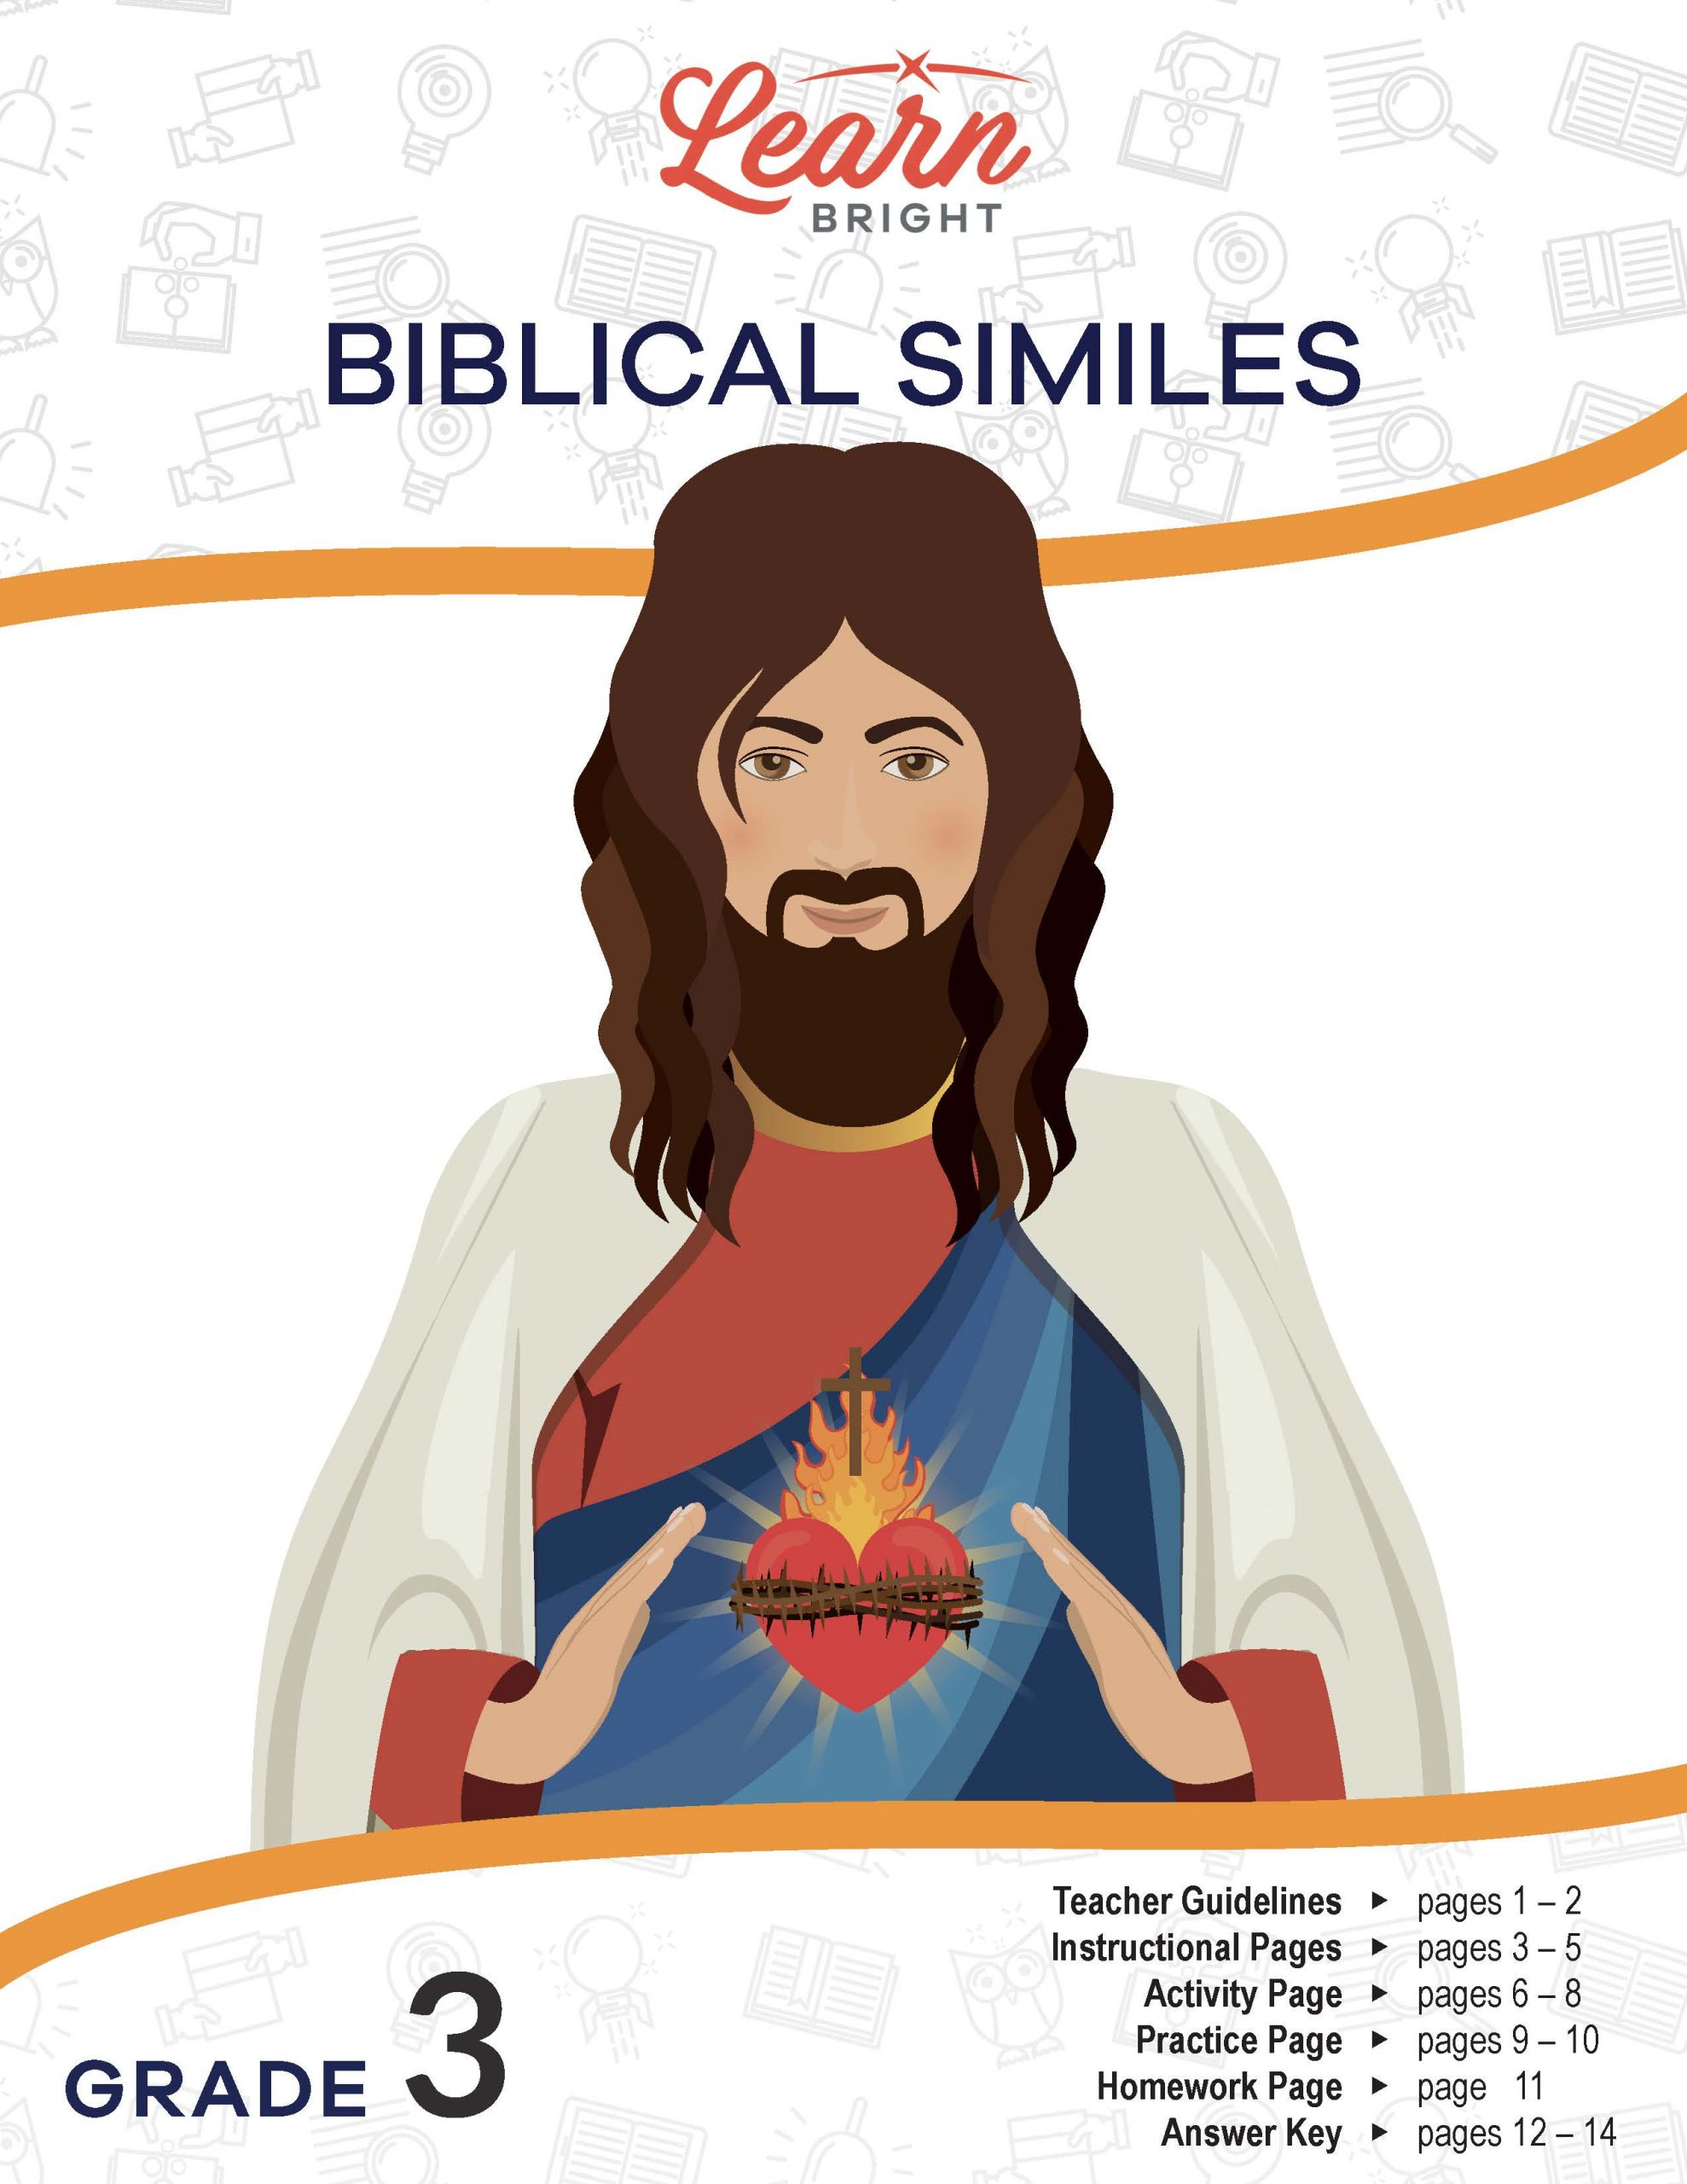 This is the title page for the Biblical Similes lesson plan. There is a graphic of Jesus Christ holding a flaming heart with a crown of thorns around the middle. The orange Learn Bright logo is at the top of the page.